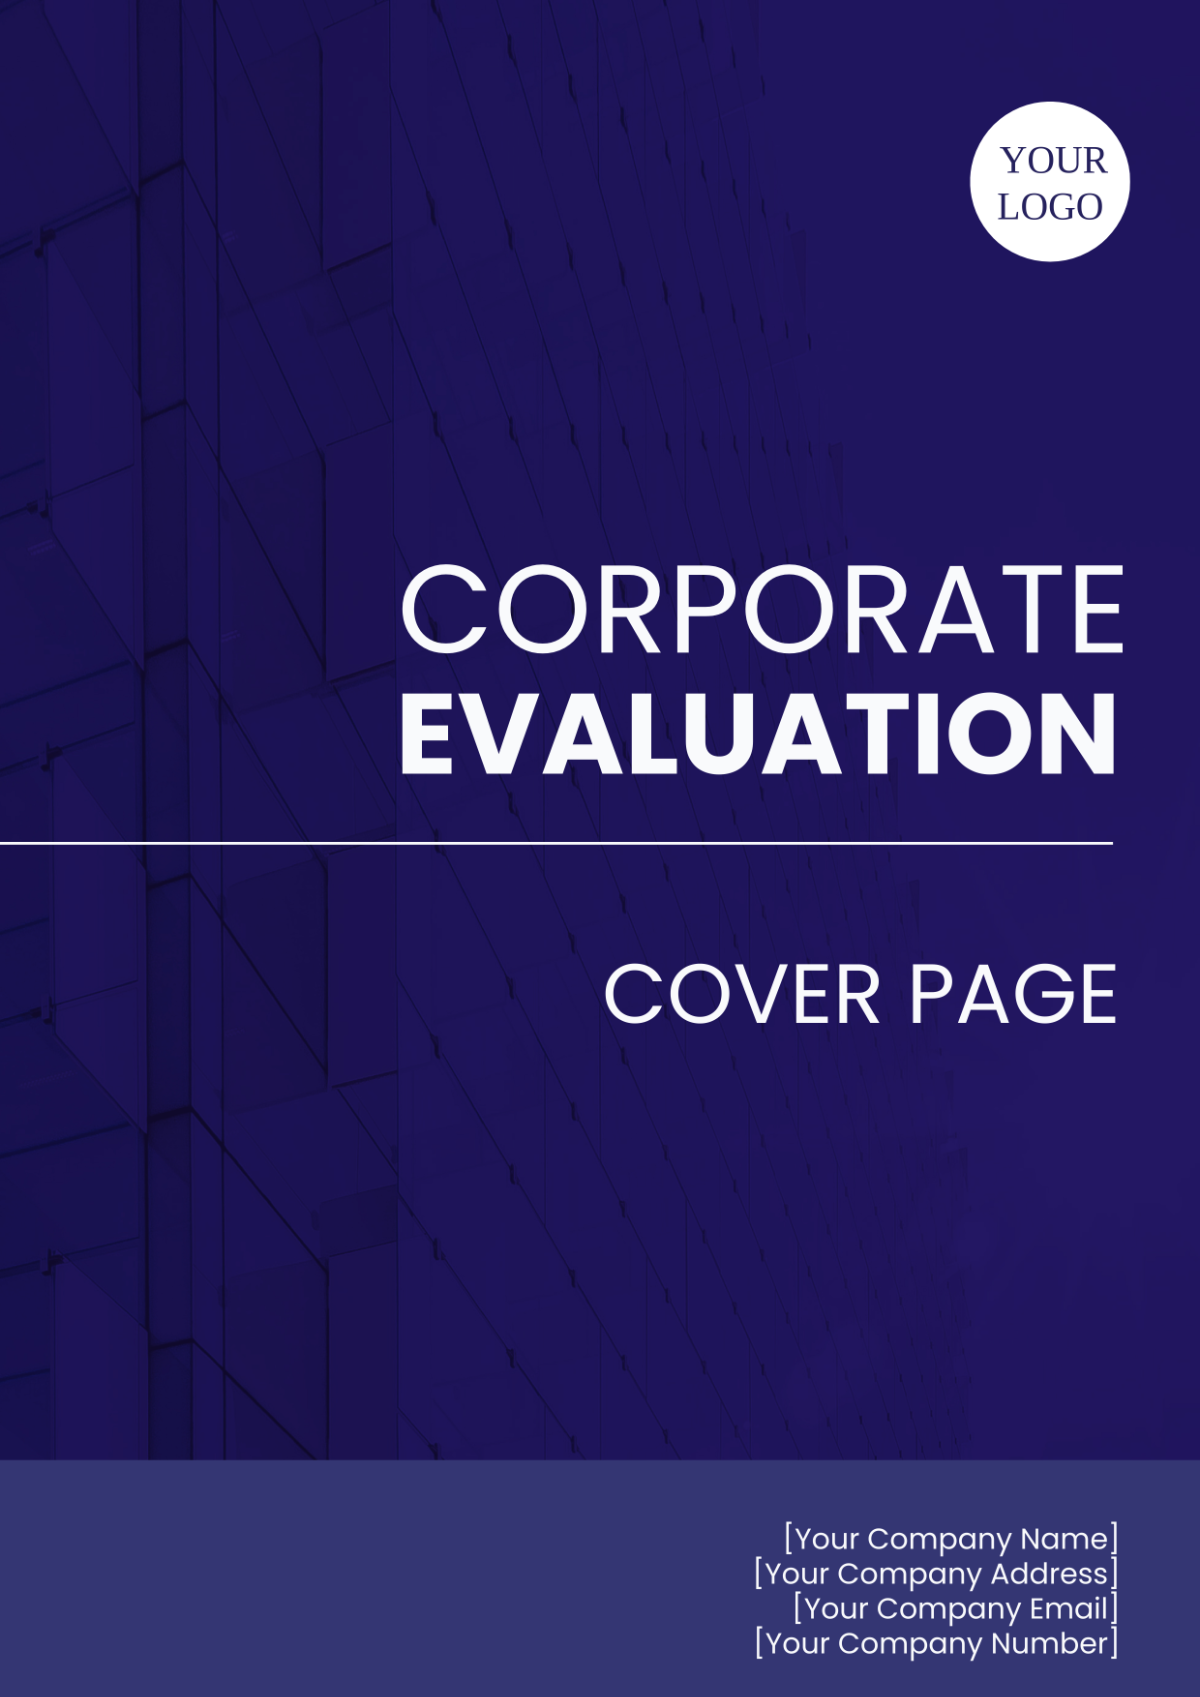 Corporate Evaluation Cover Page